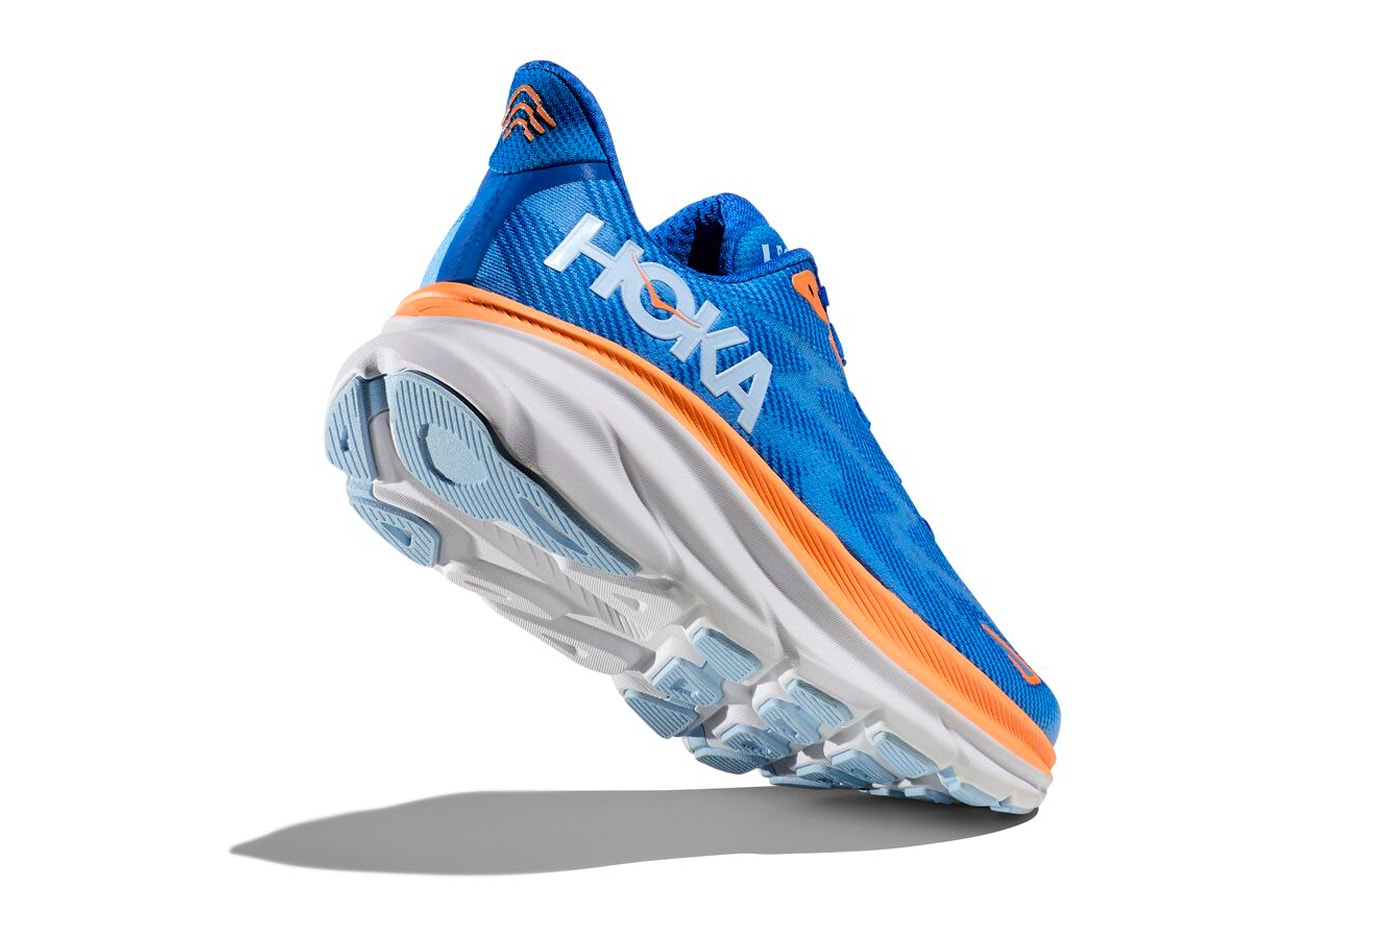 HOKA Clifton 9 best running shoes right now